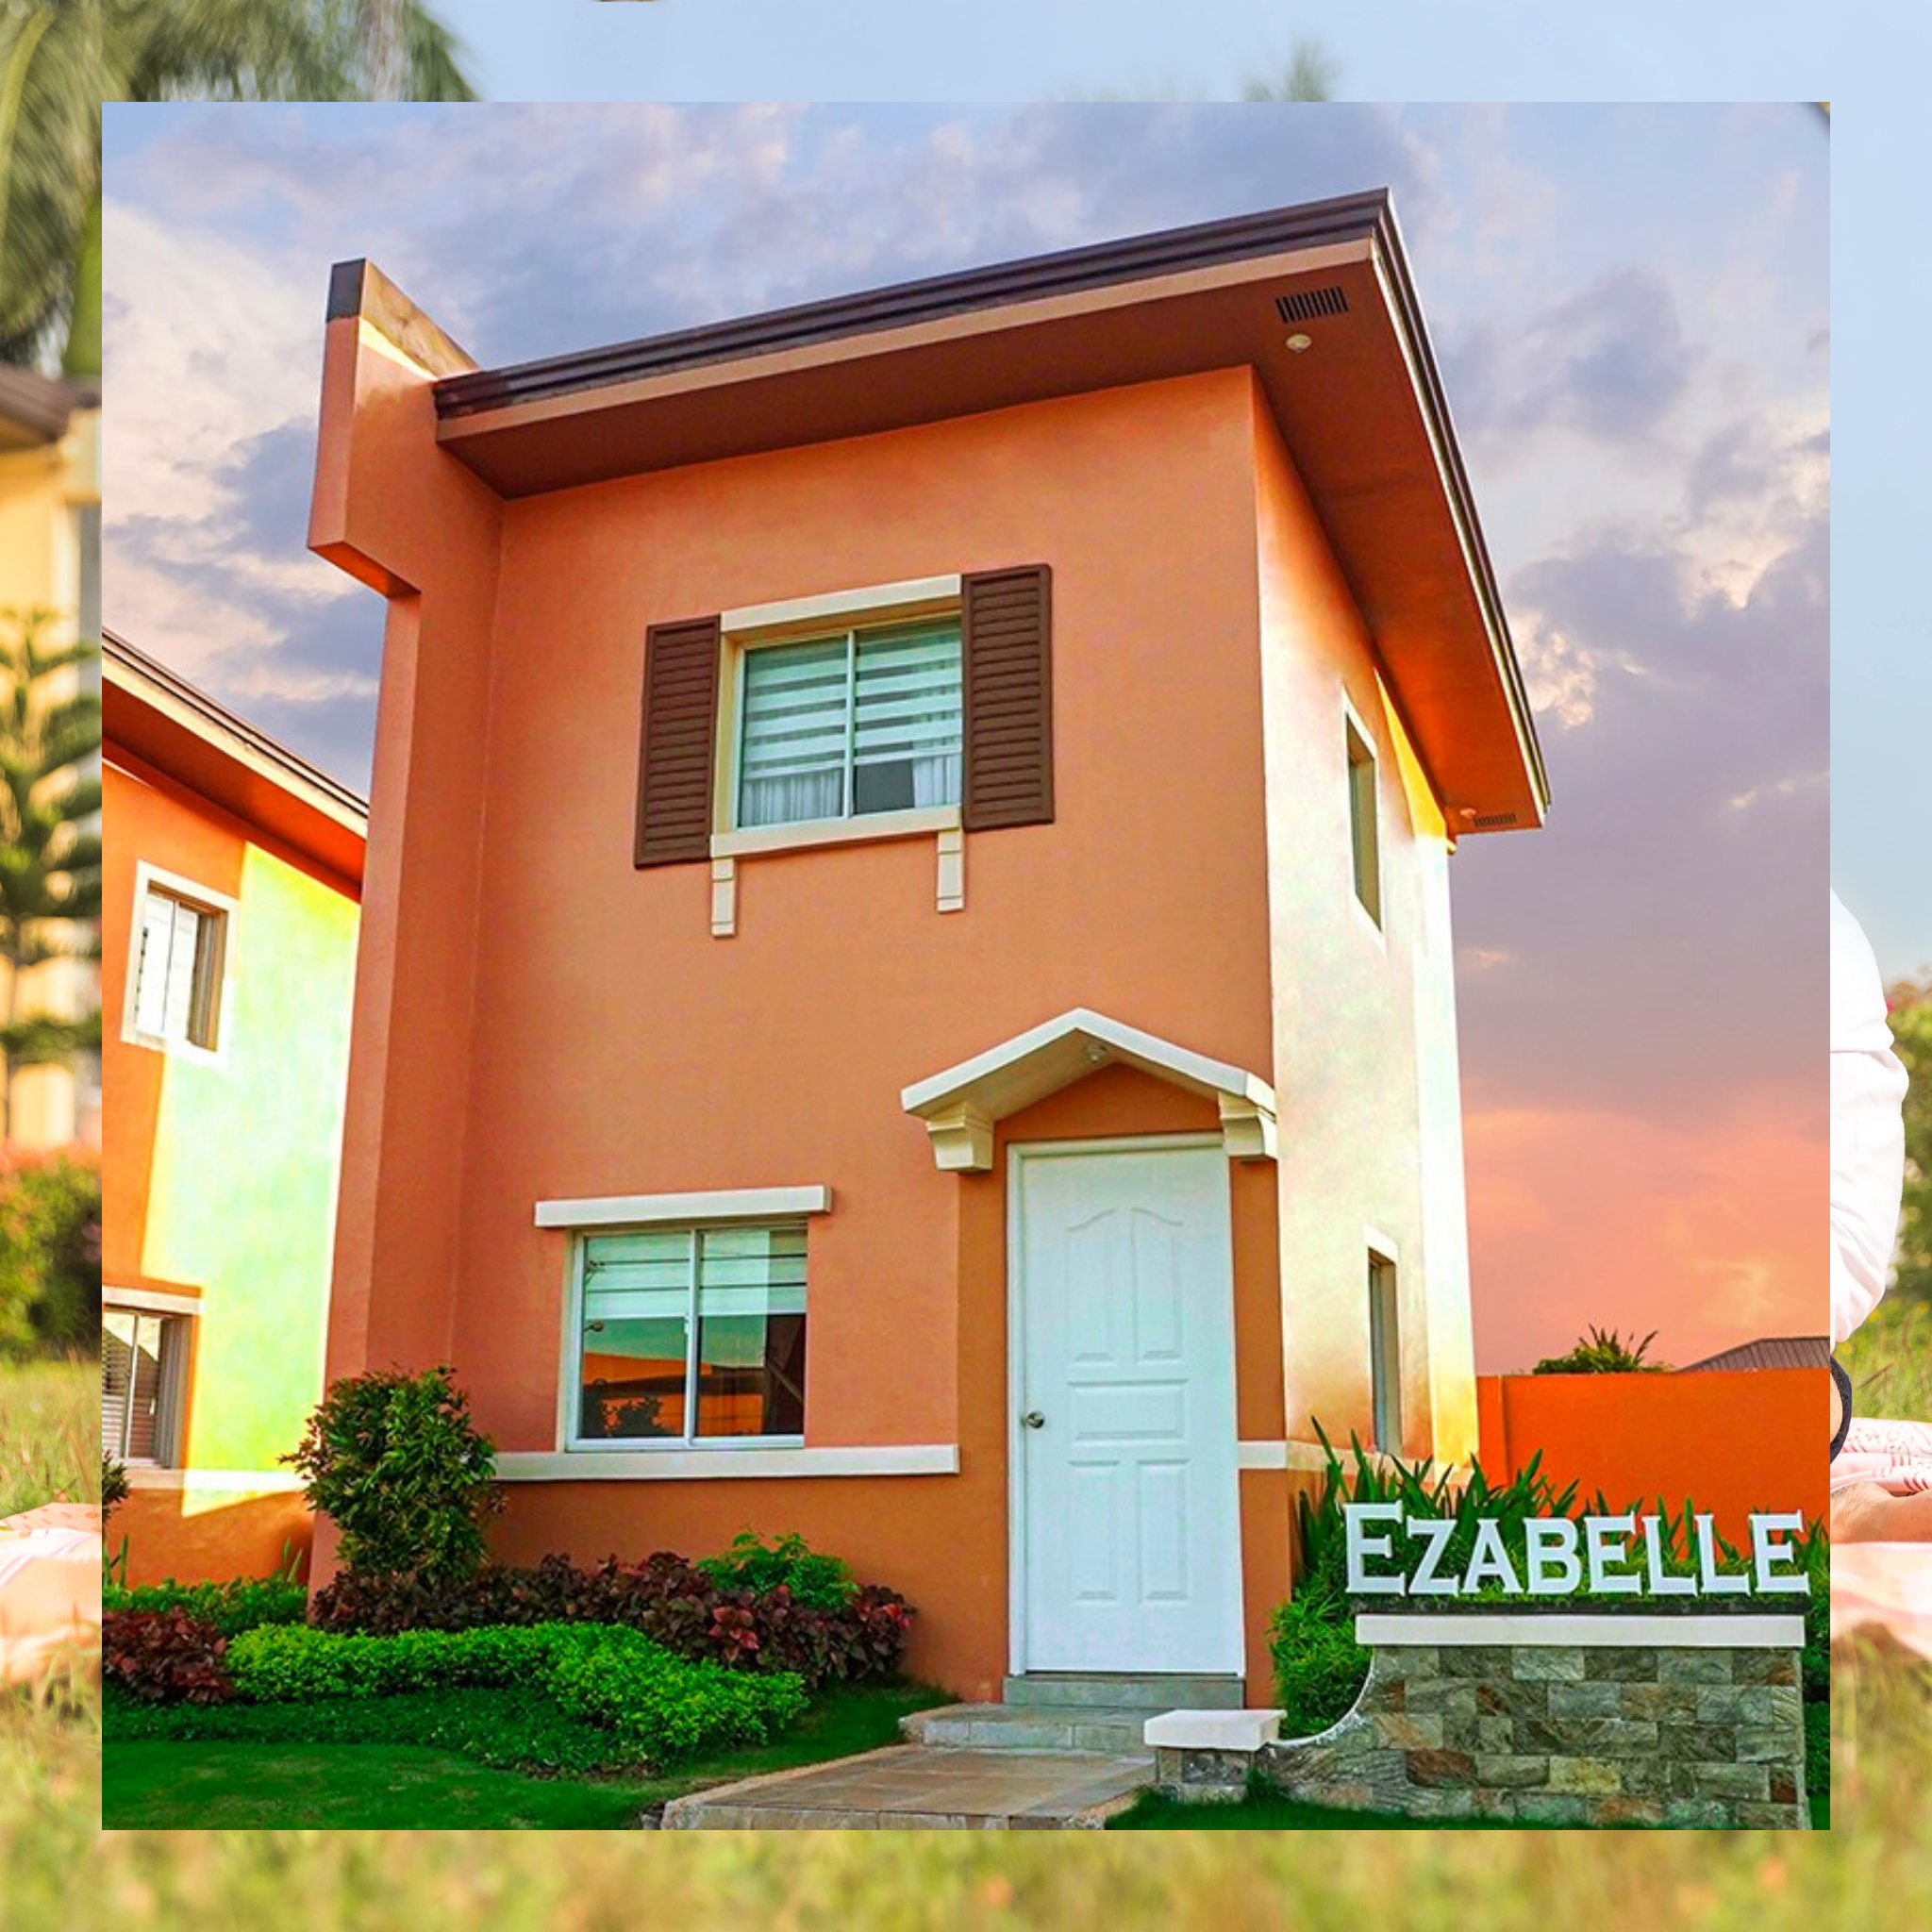 2BR Affordable House and Lot For Sale in San Juan Batangas – Ezabelle 60sqm